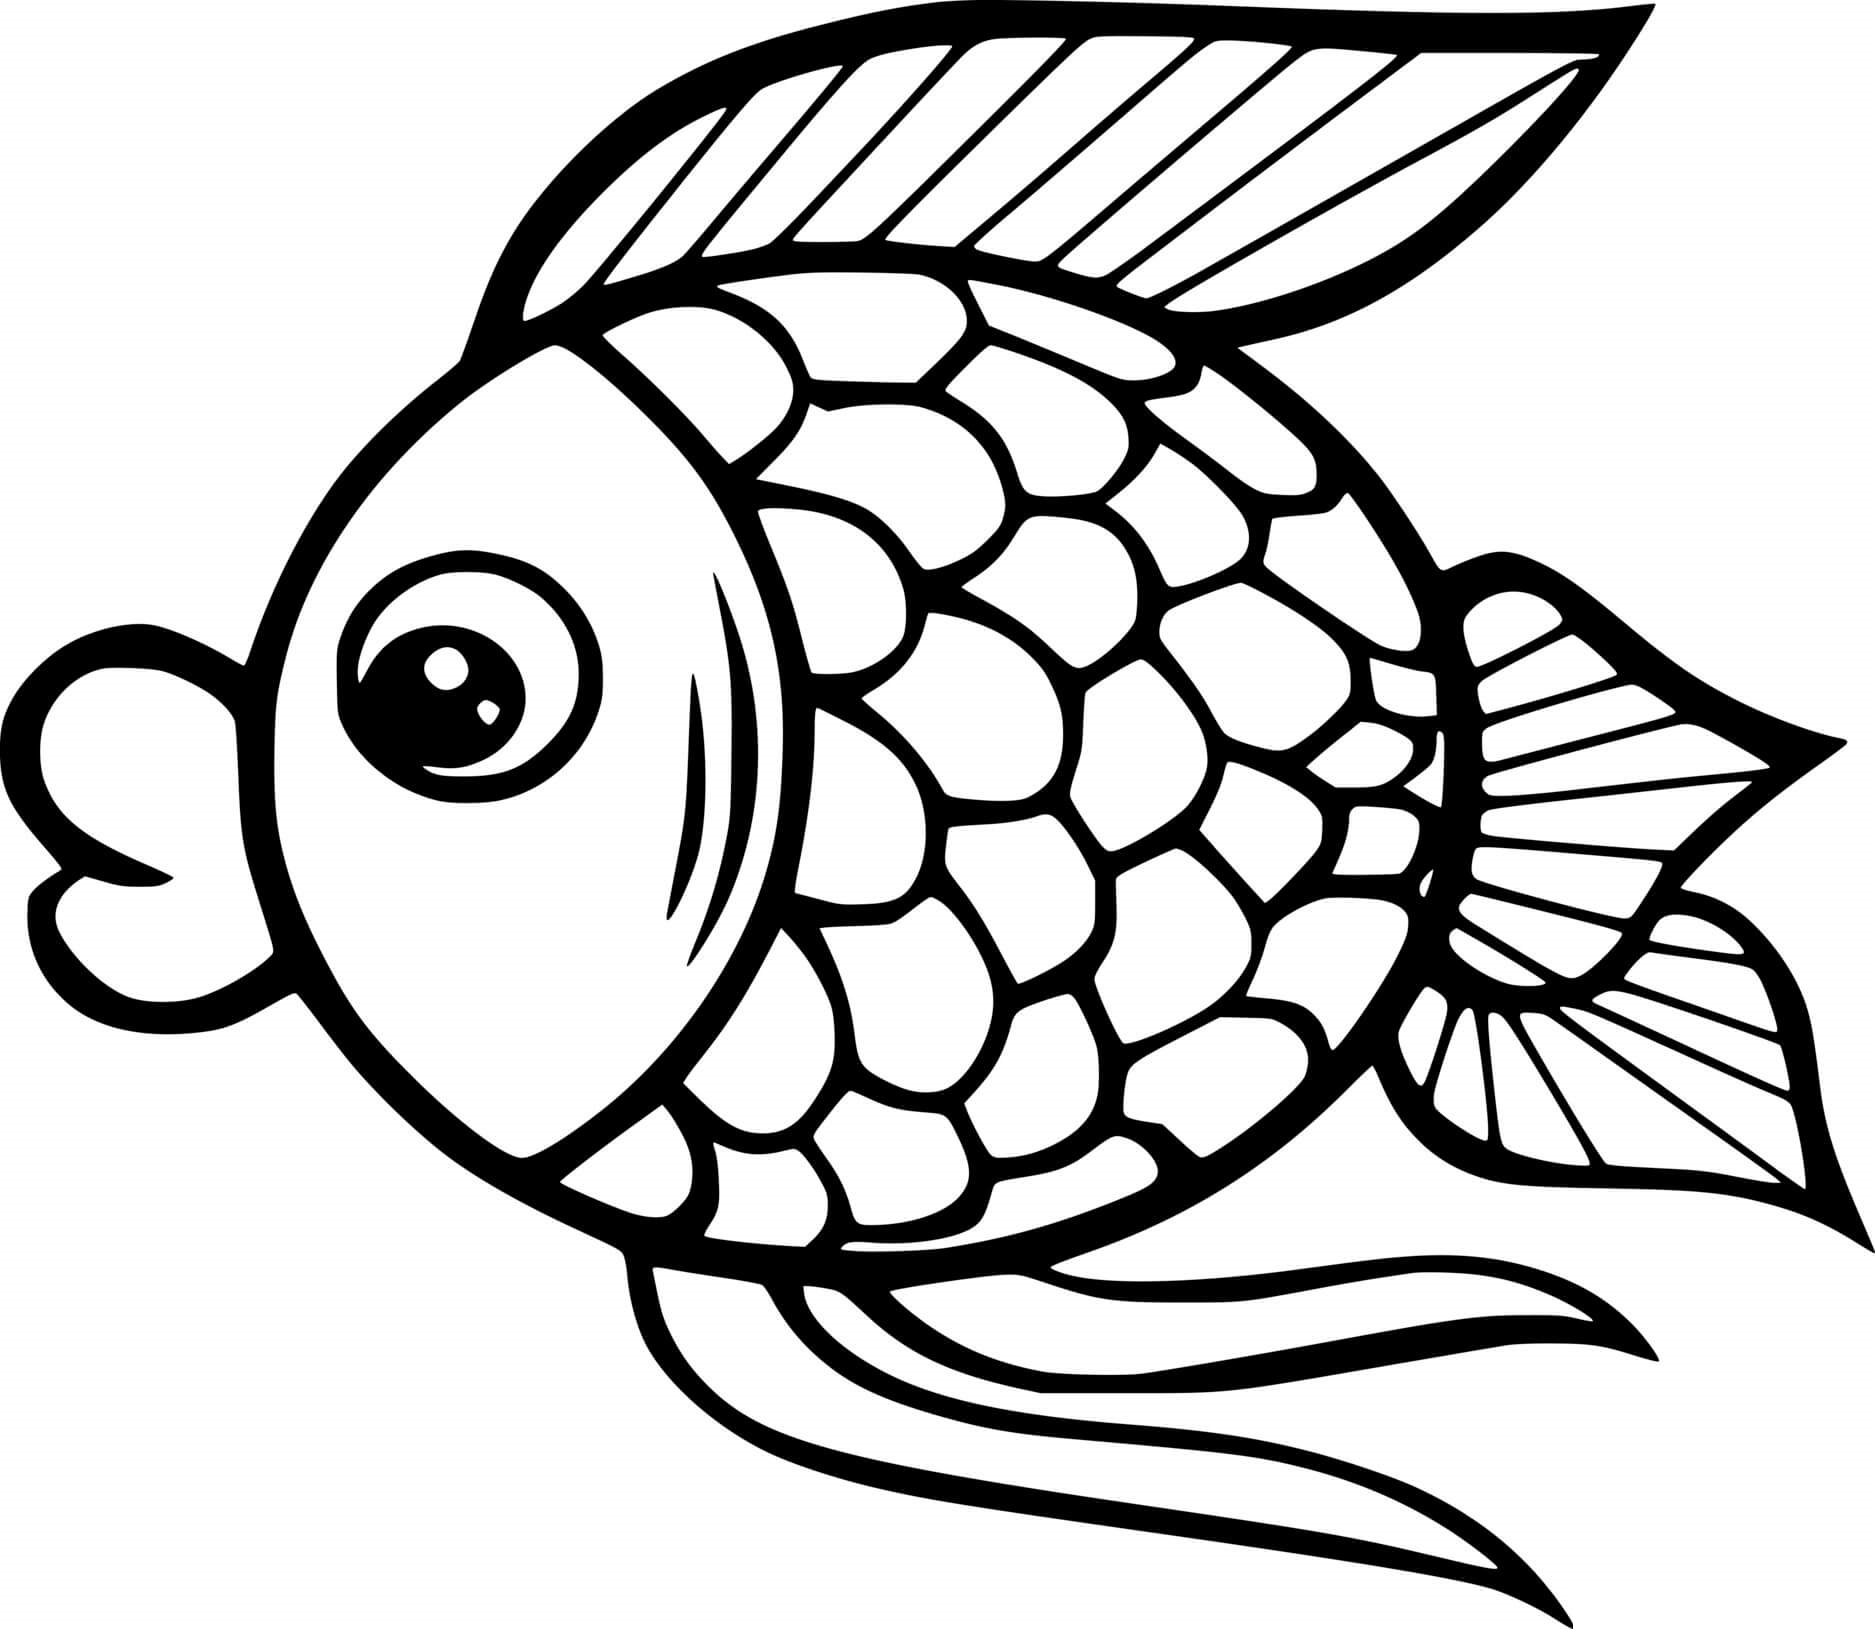 Extraordinary goldfish coloring for the little ones